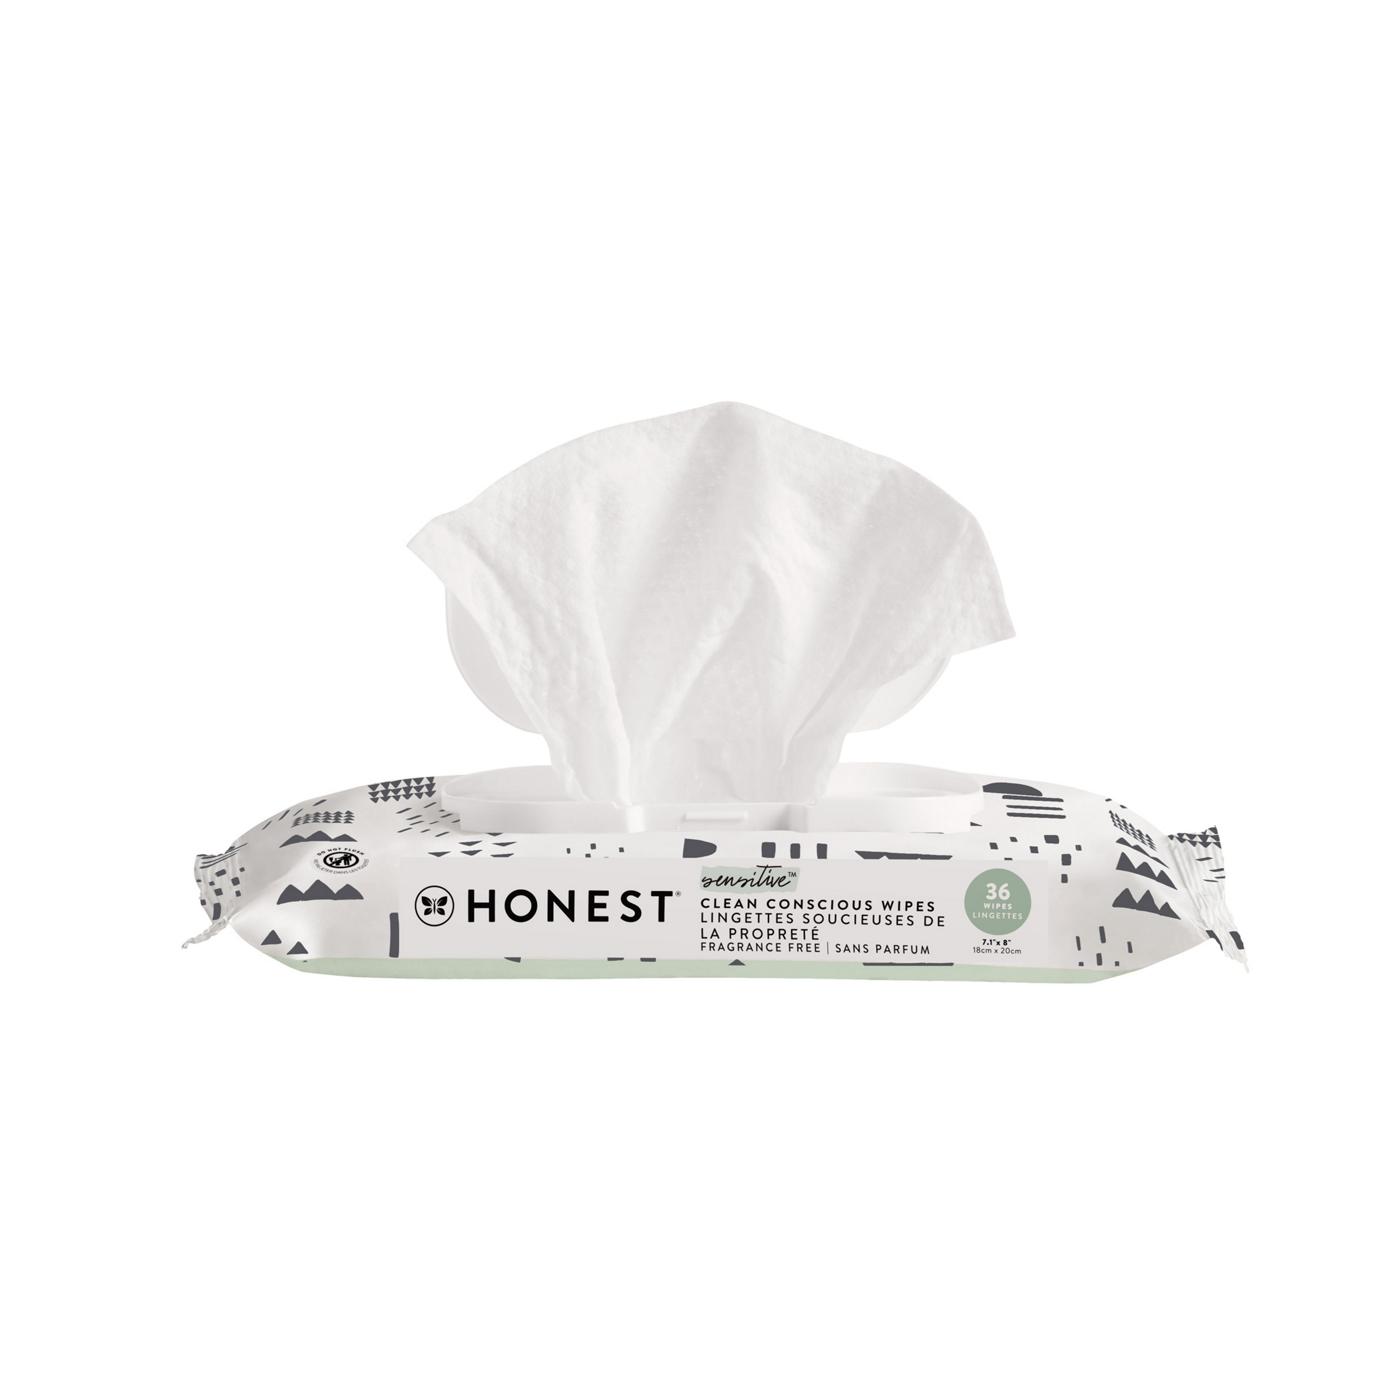 The Honest Company Designer Collection Baby Wipes; image 2 of 4